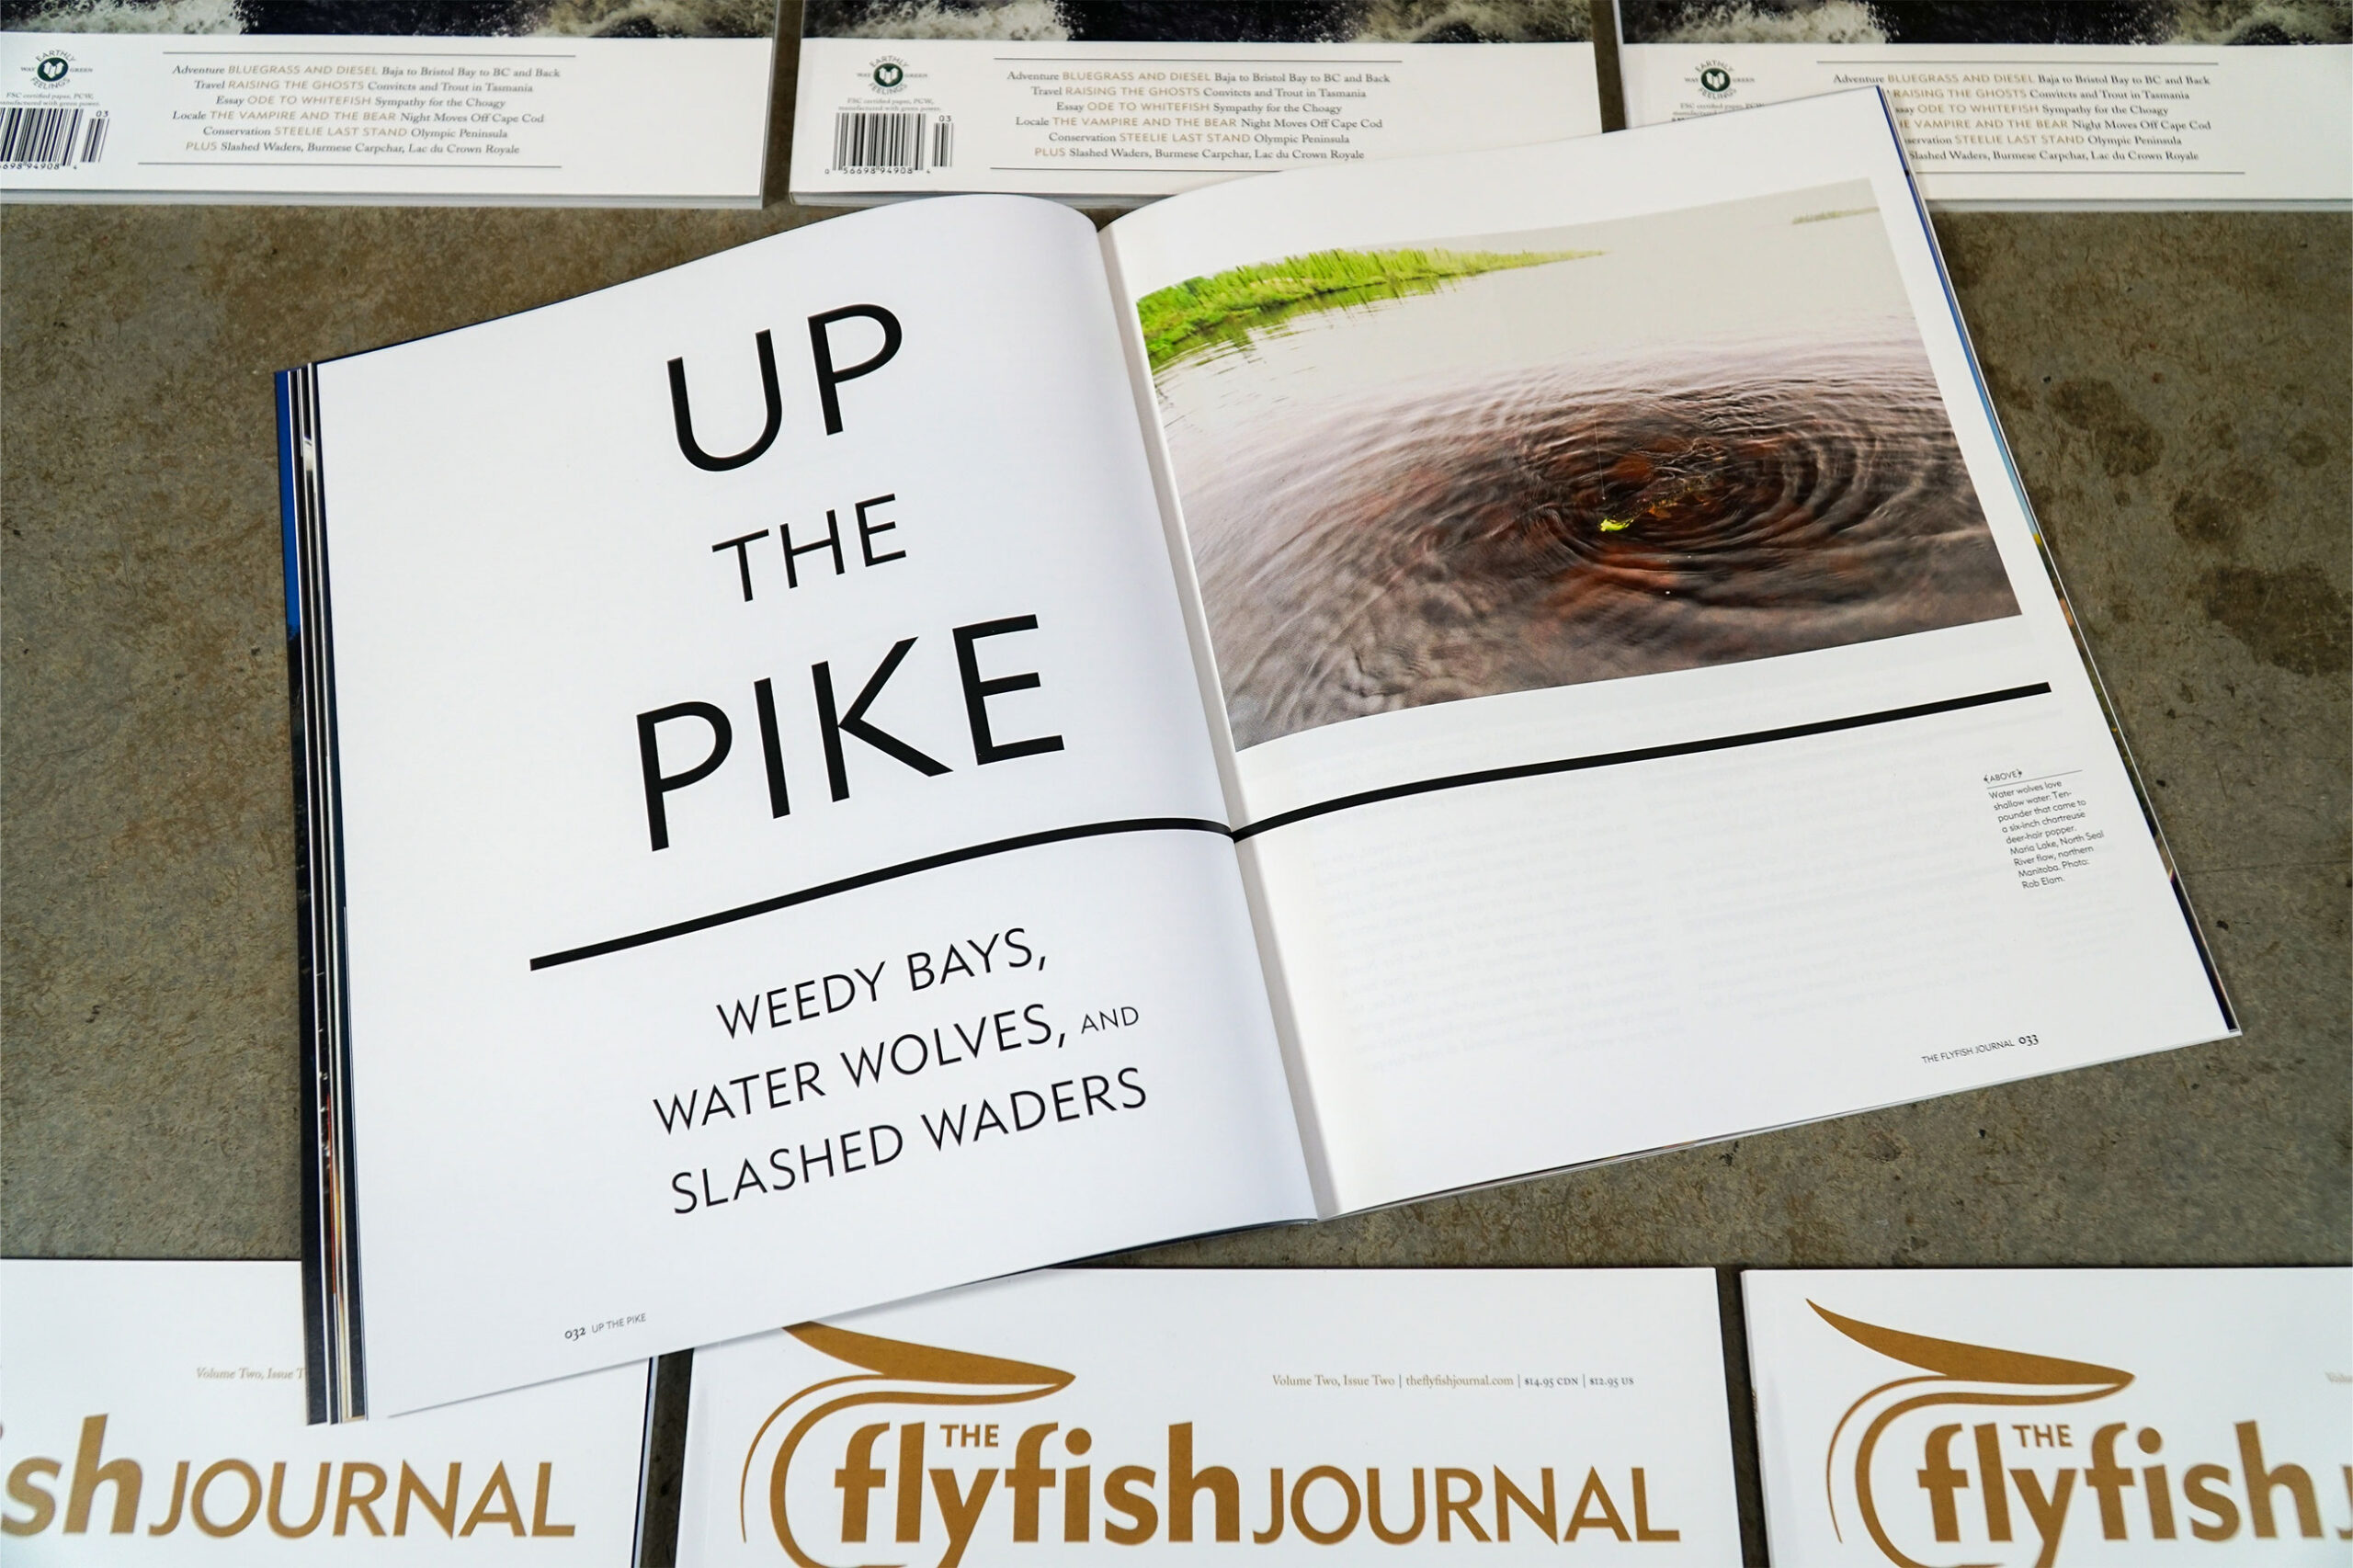 The Flyfish Journal Volume 2 Issue 2 Feature Up the Pike